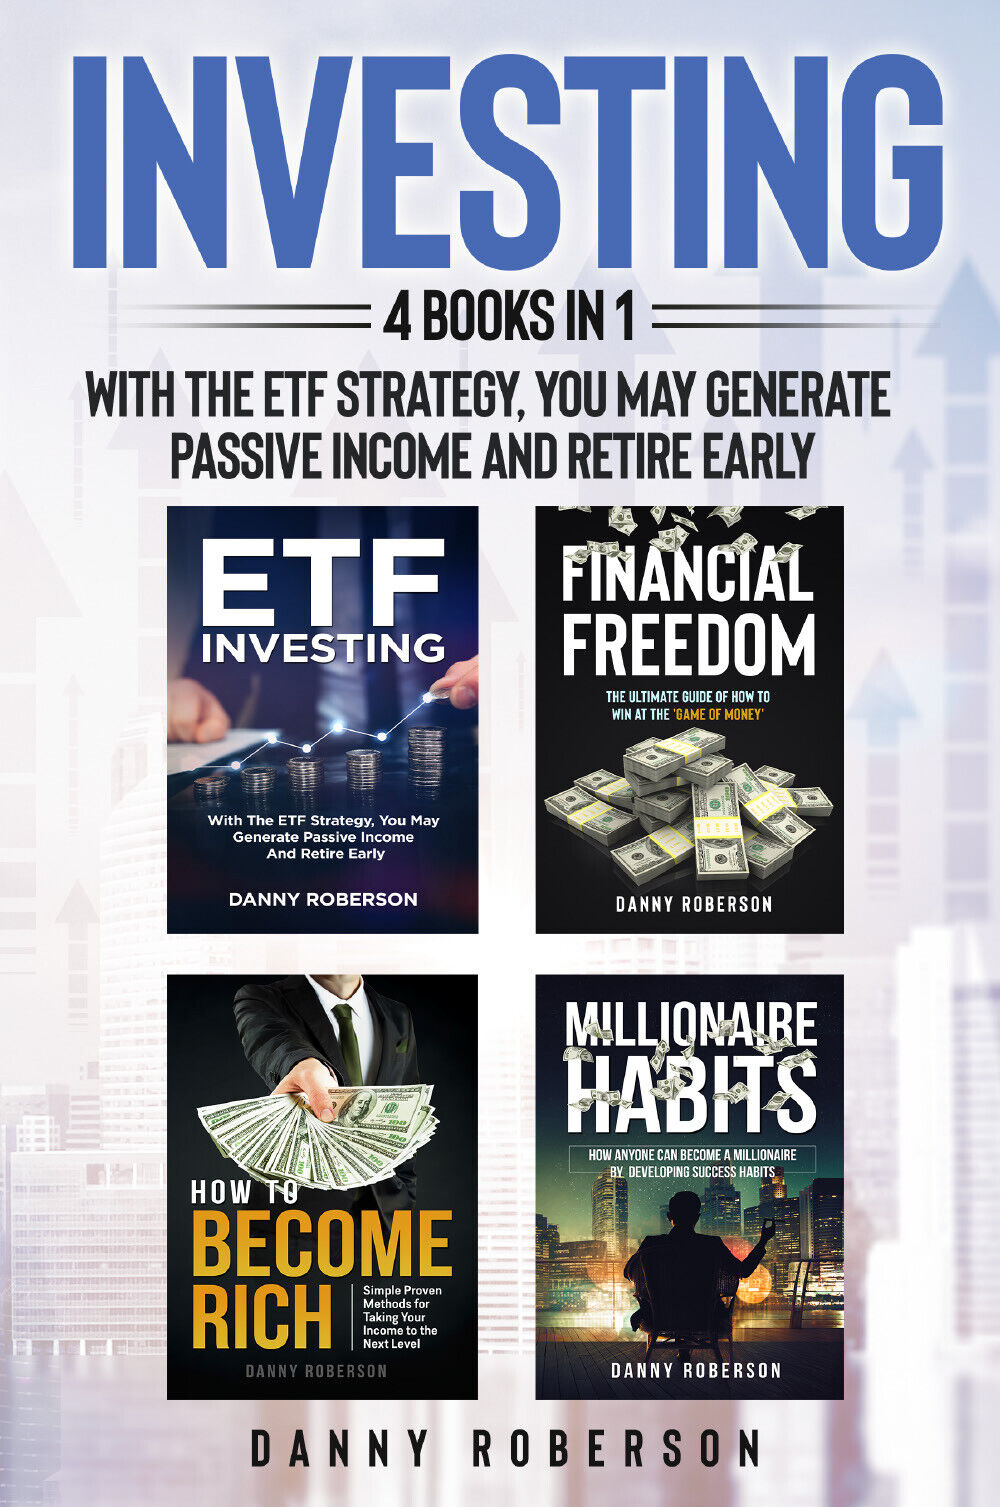 Investing (4 Books in 1). With the ETF Strategy, you may generate passive income